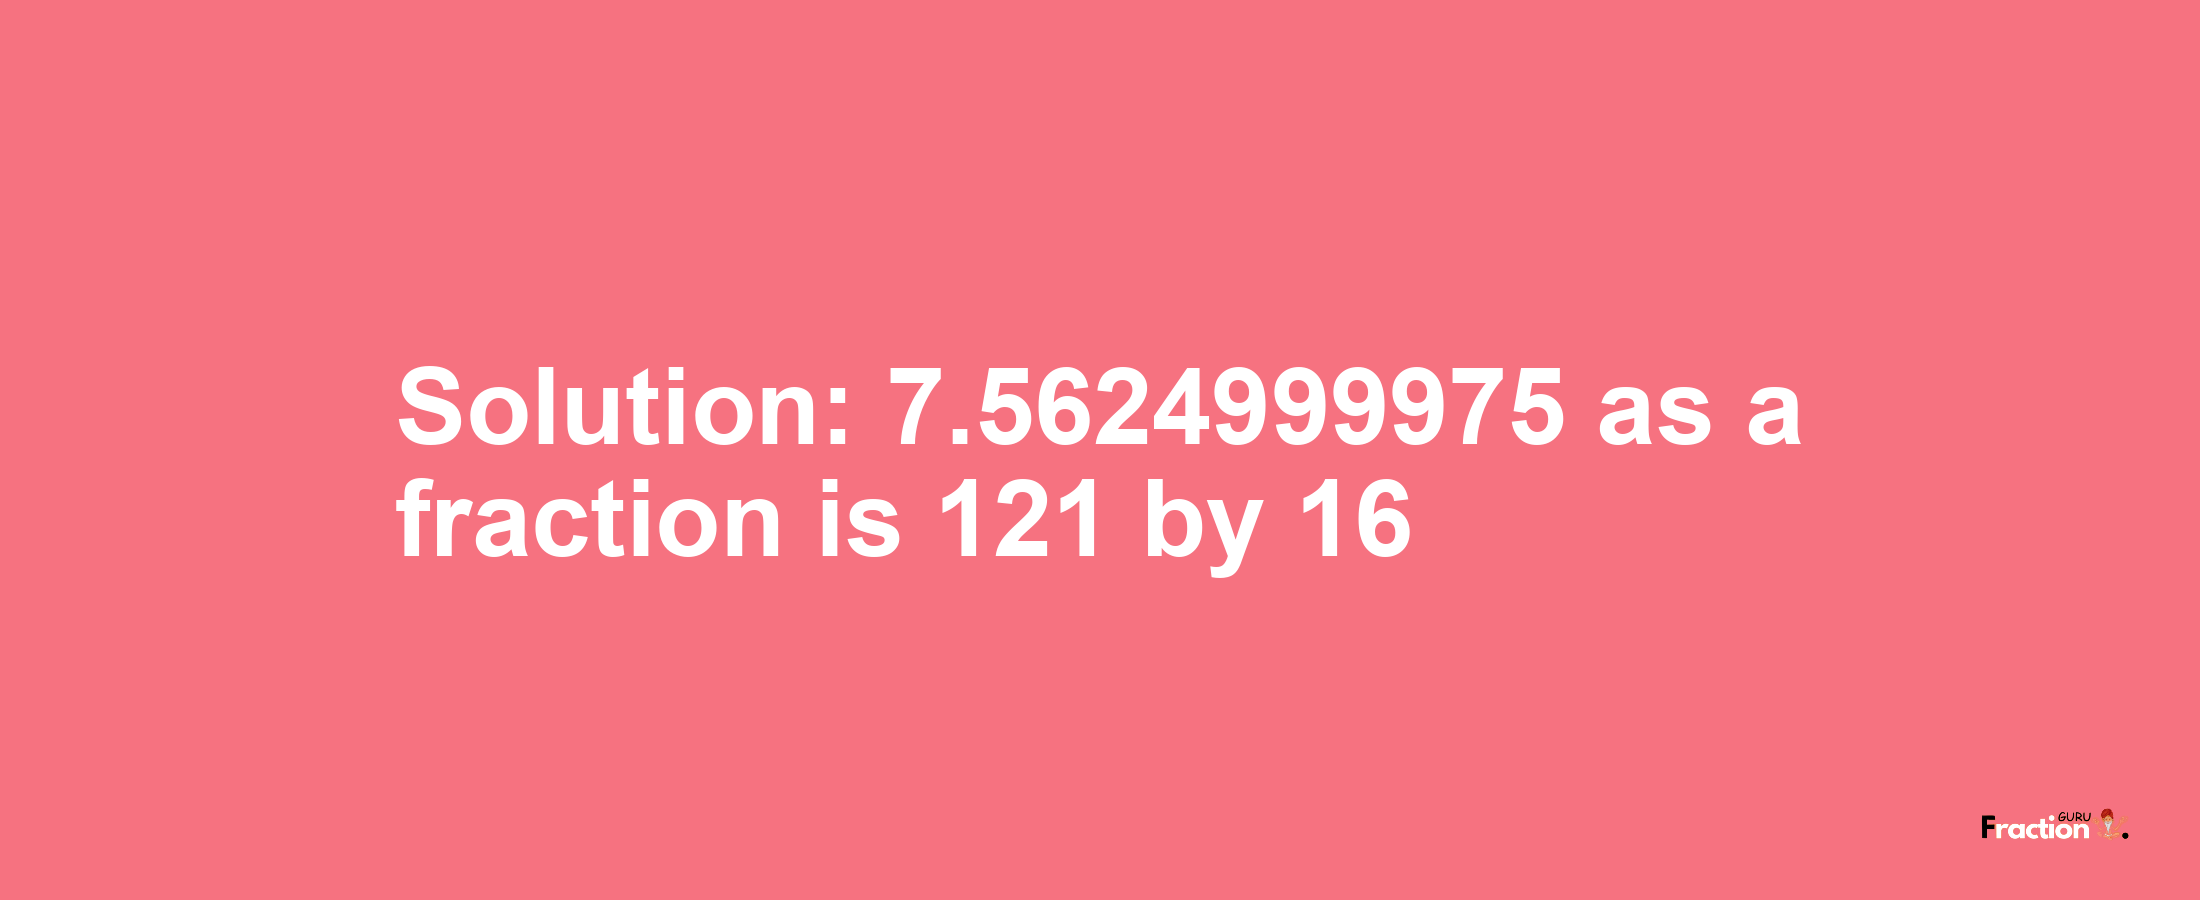 Solution:7.5624999975 as a fraction is 121/16